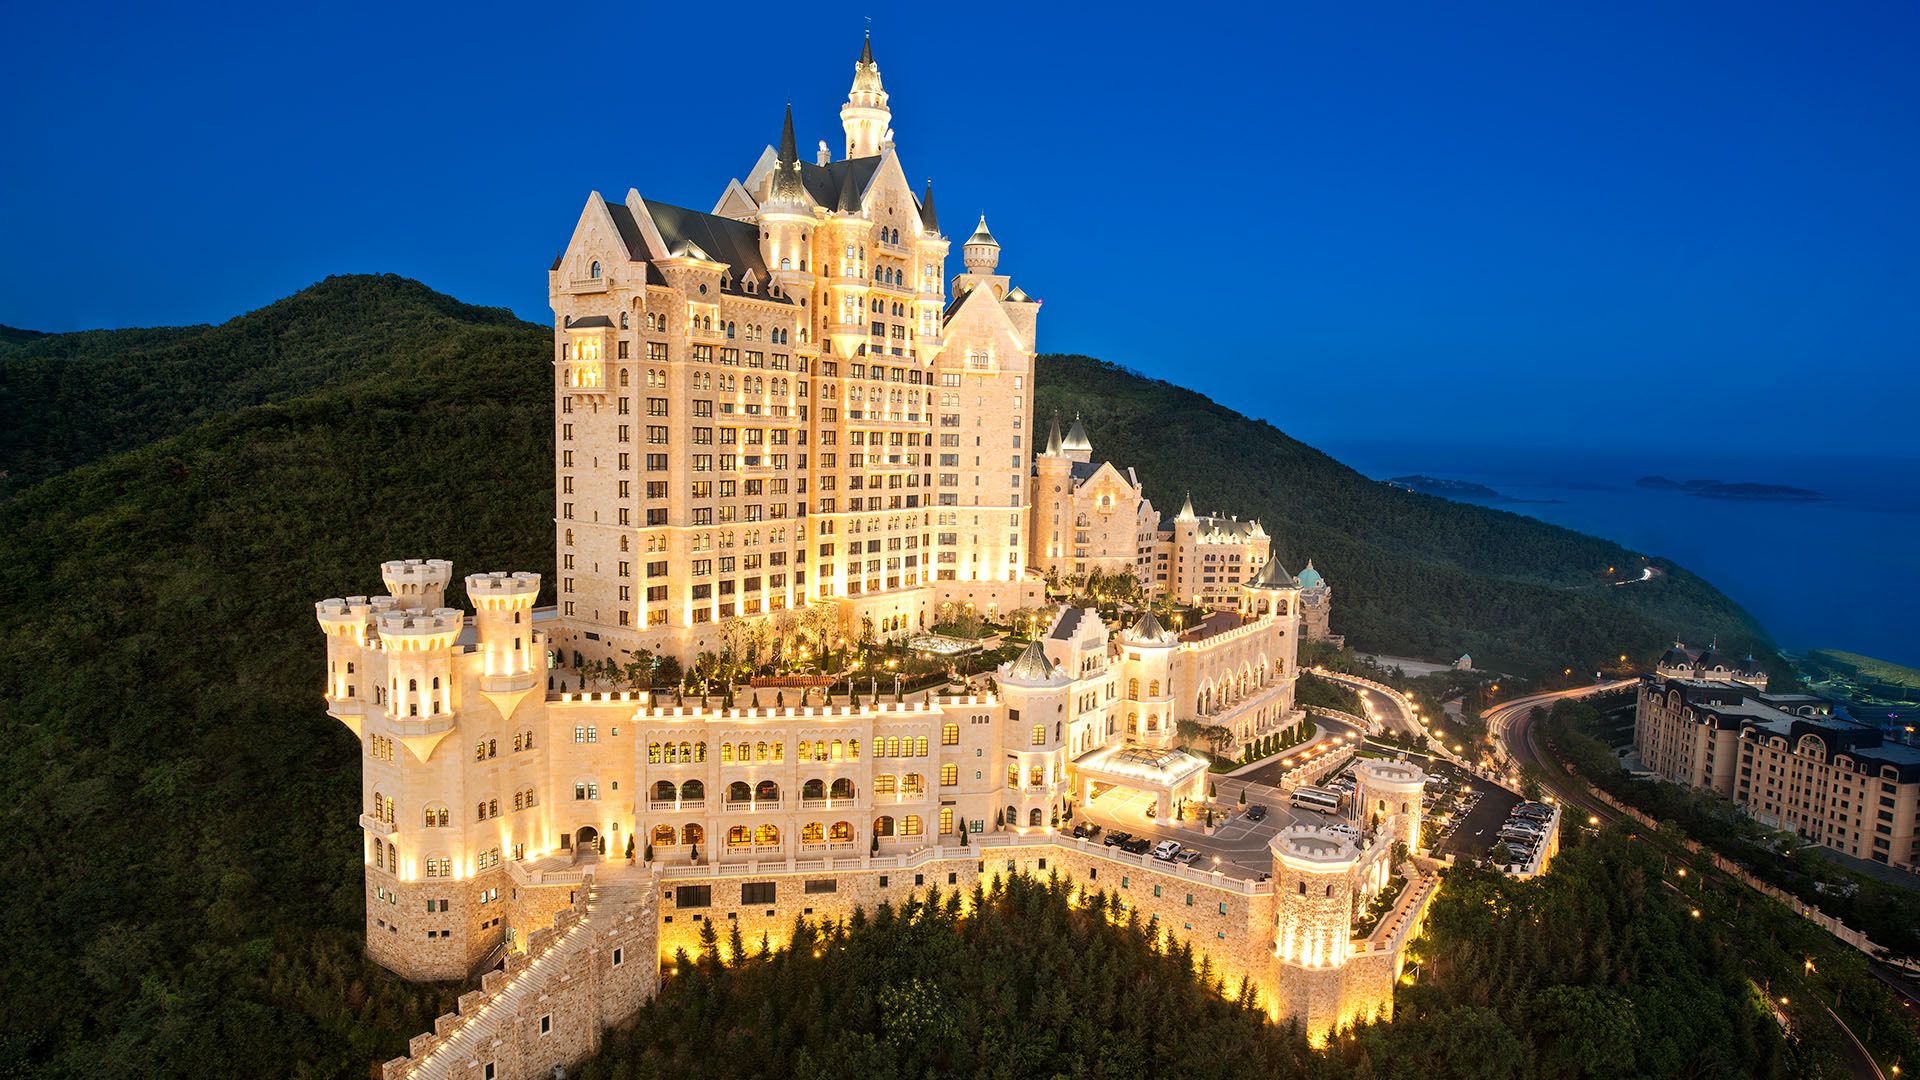 The Castle Hotel, a Luxury Collection Hotel, Dalian, China, Bavarian castle atop hill at night